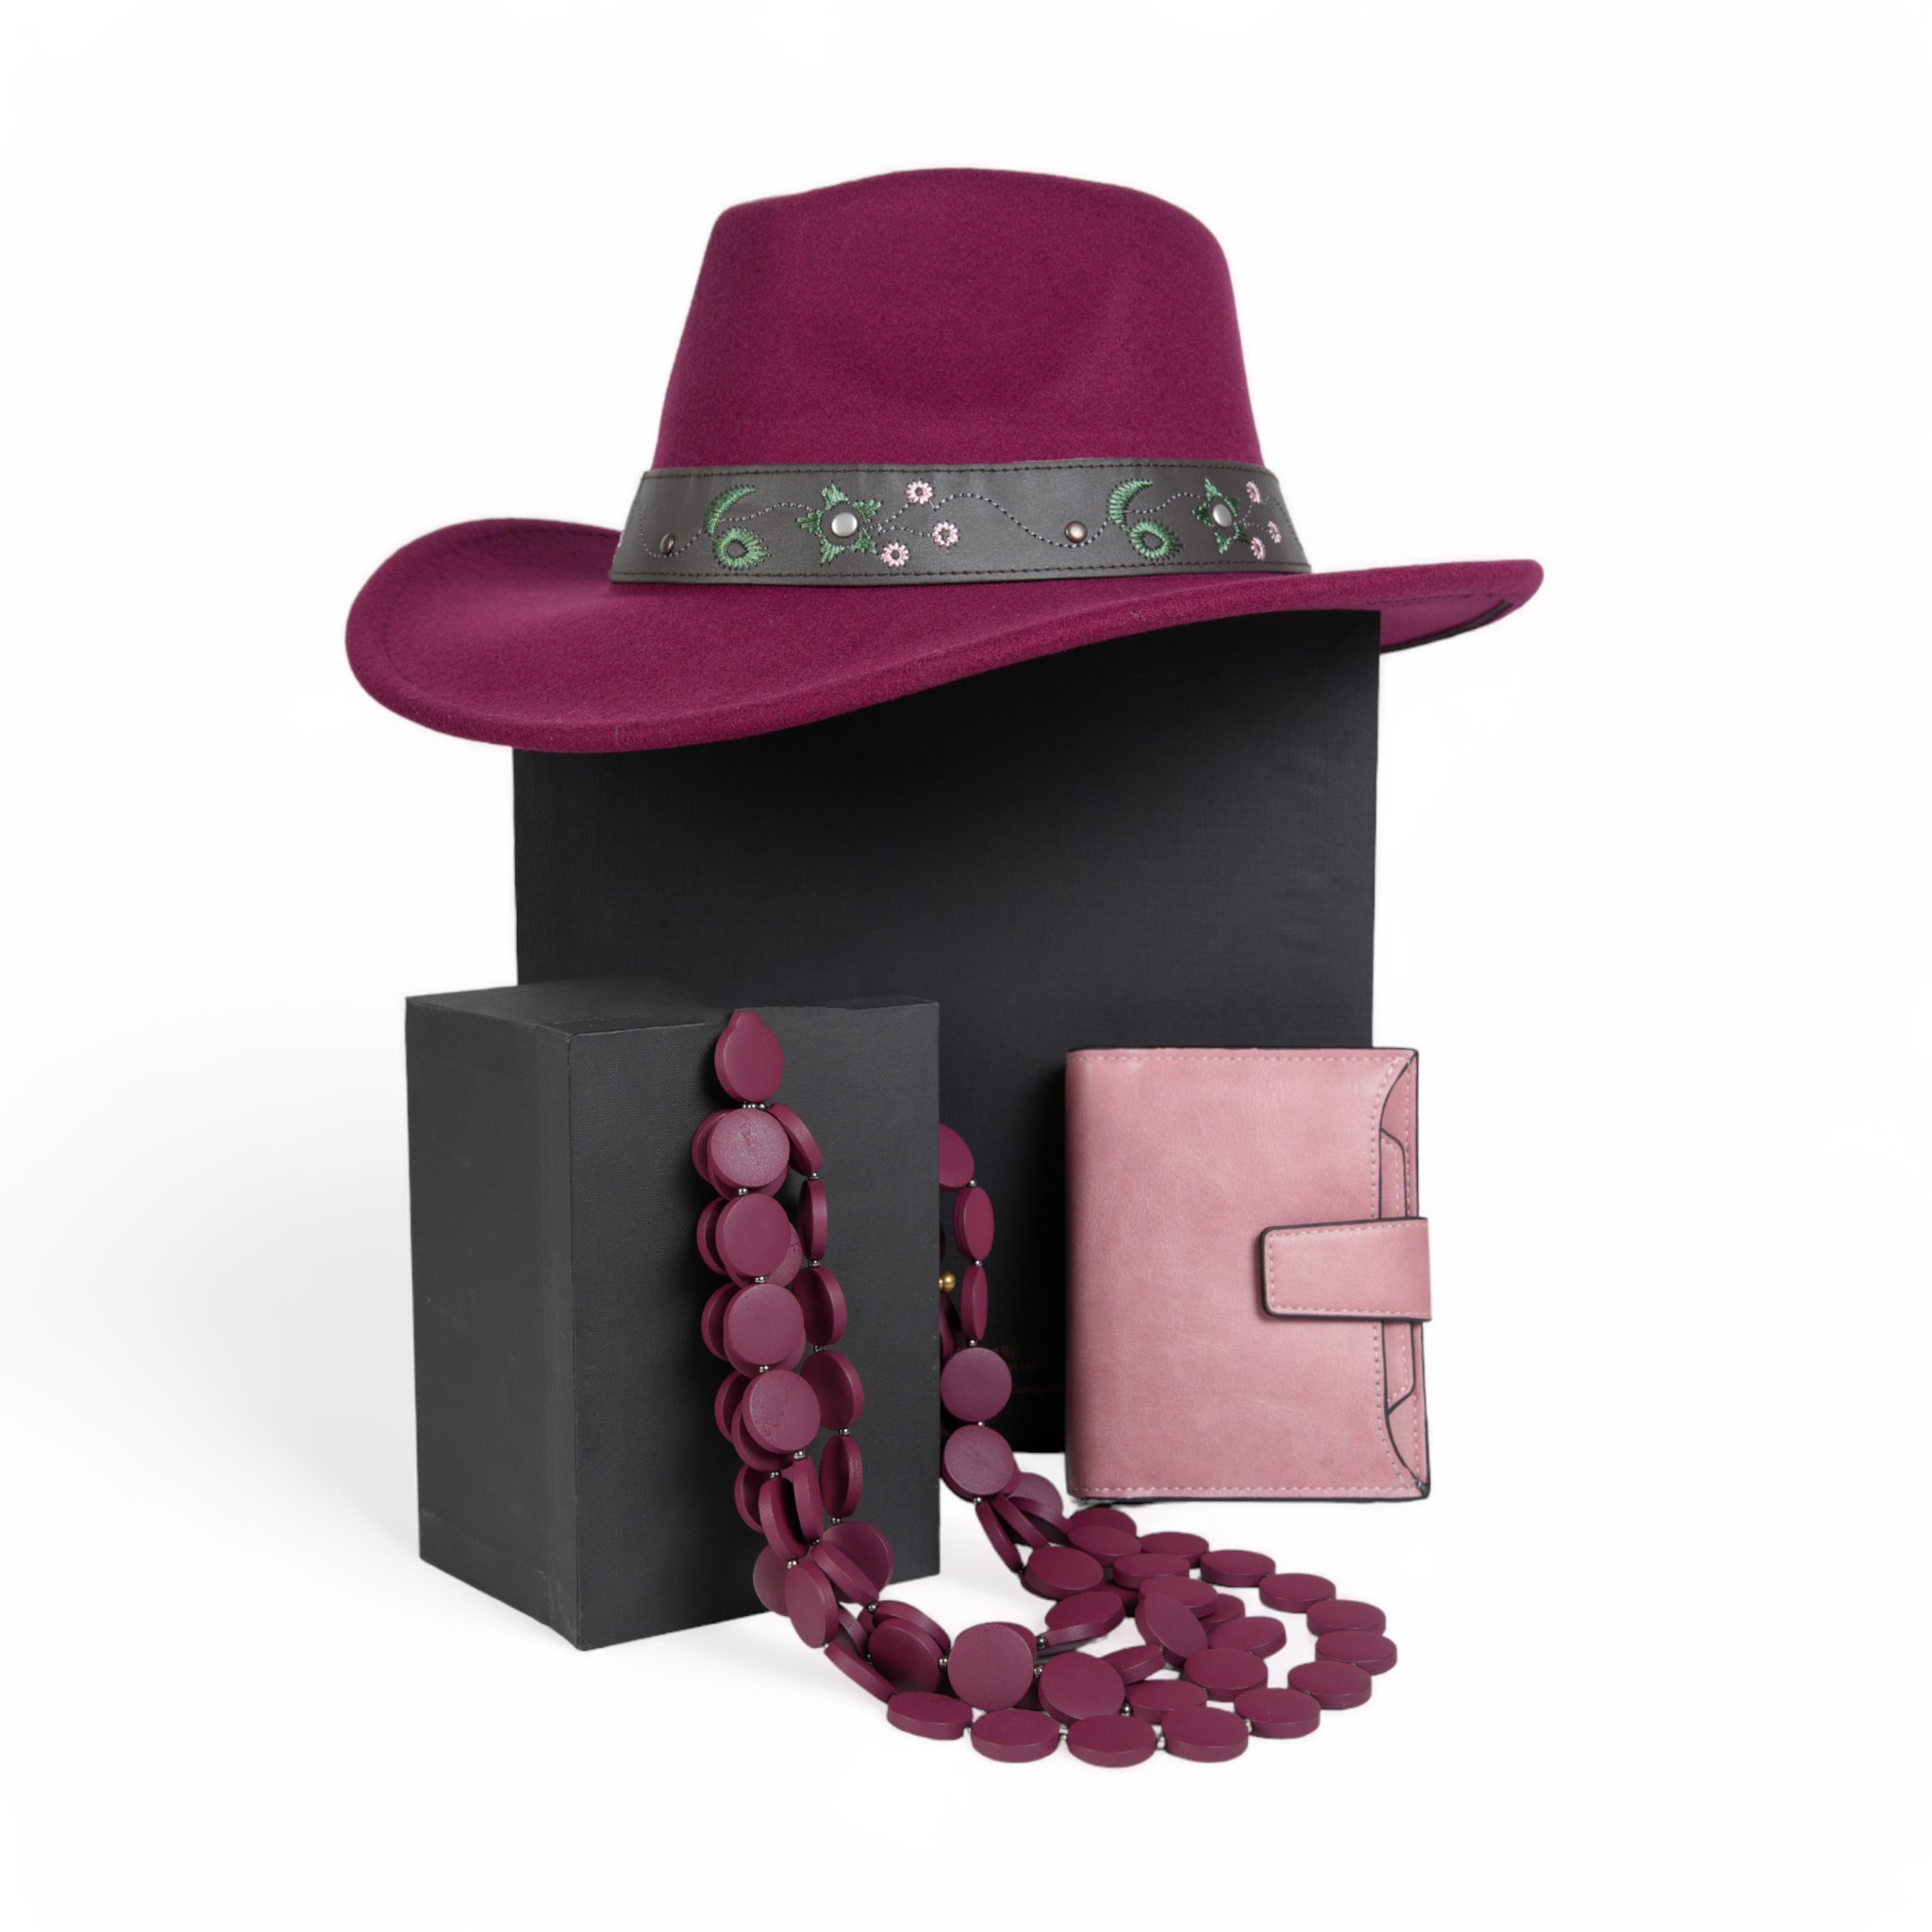 Chokore Special 3-in-1 Gift Set for Her (Cowboy Hat, Wallet, & Necklace)